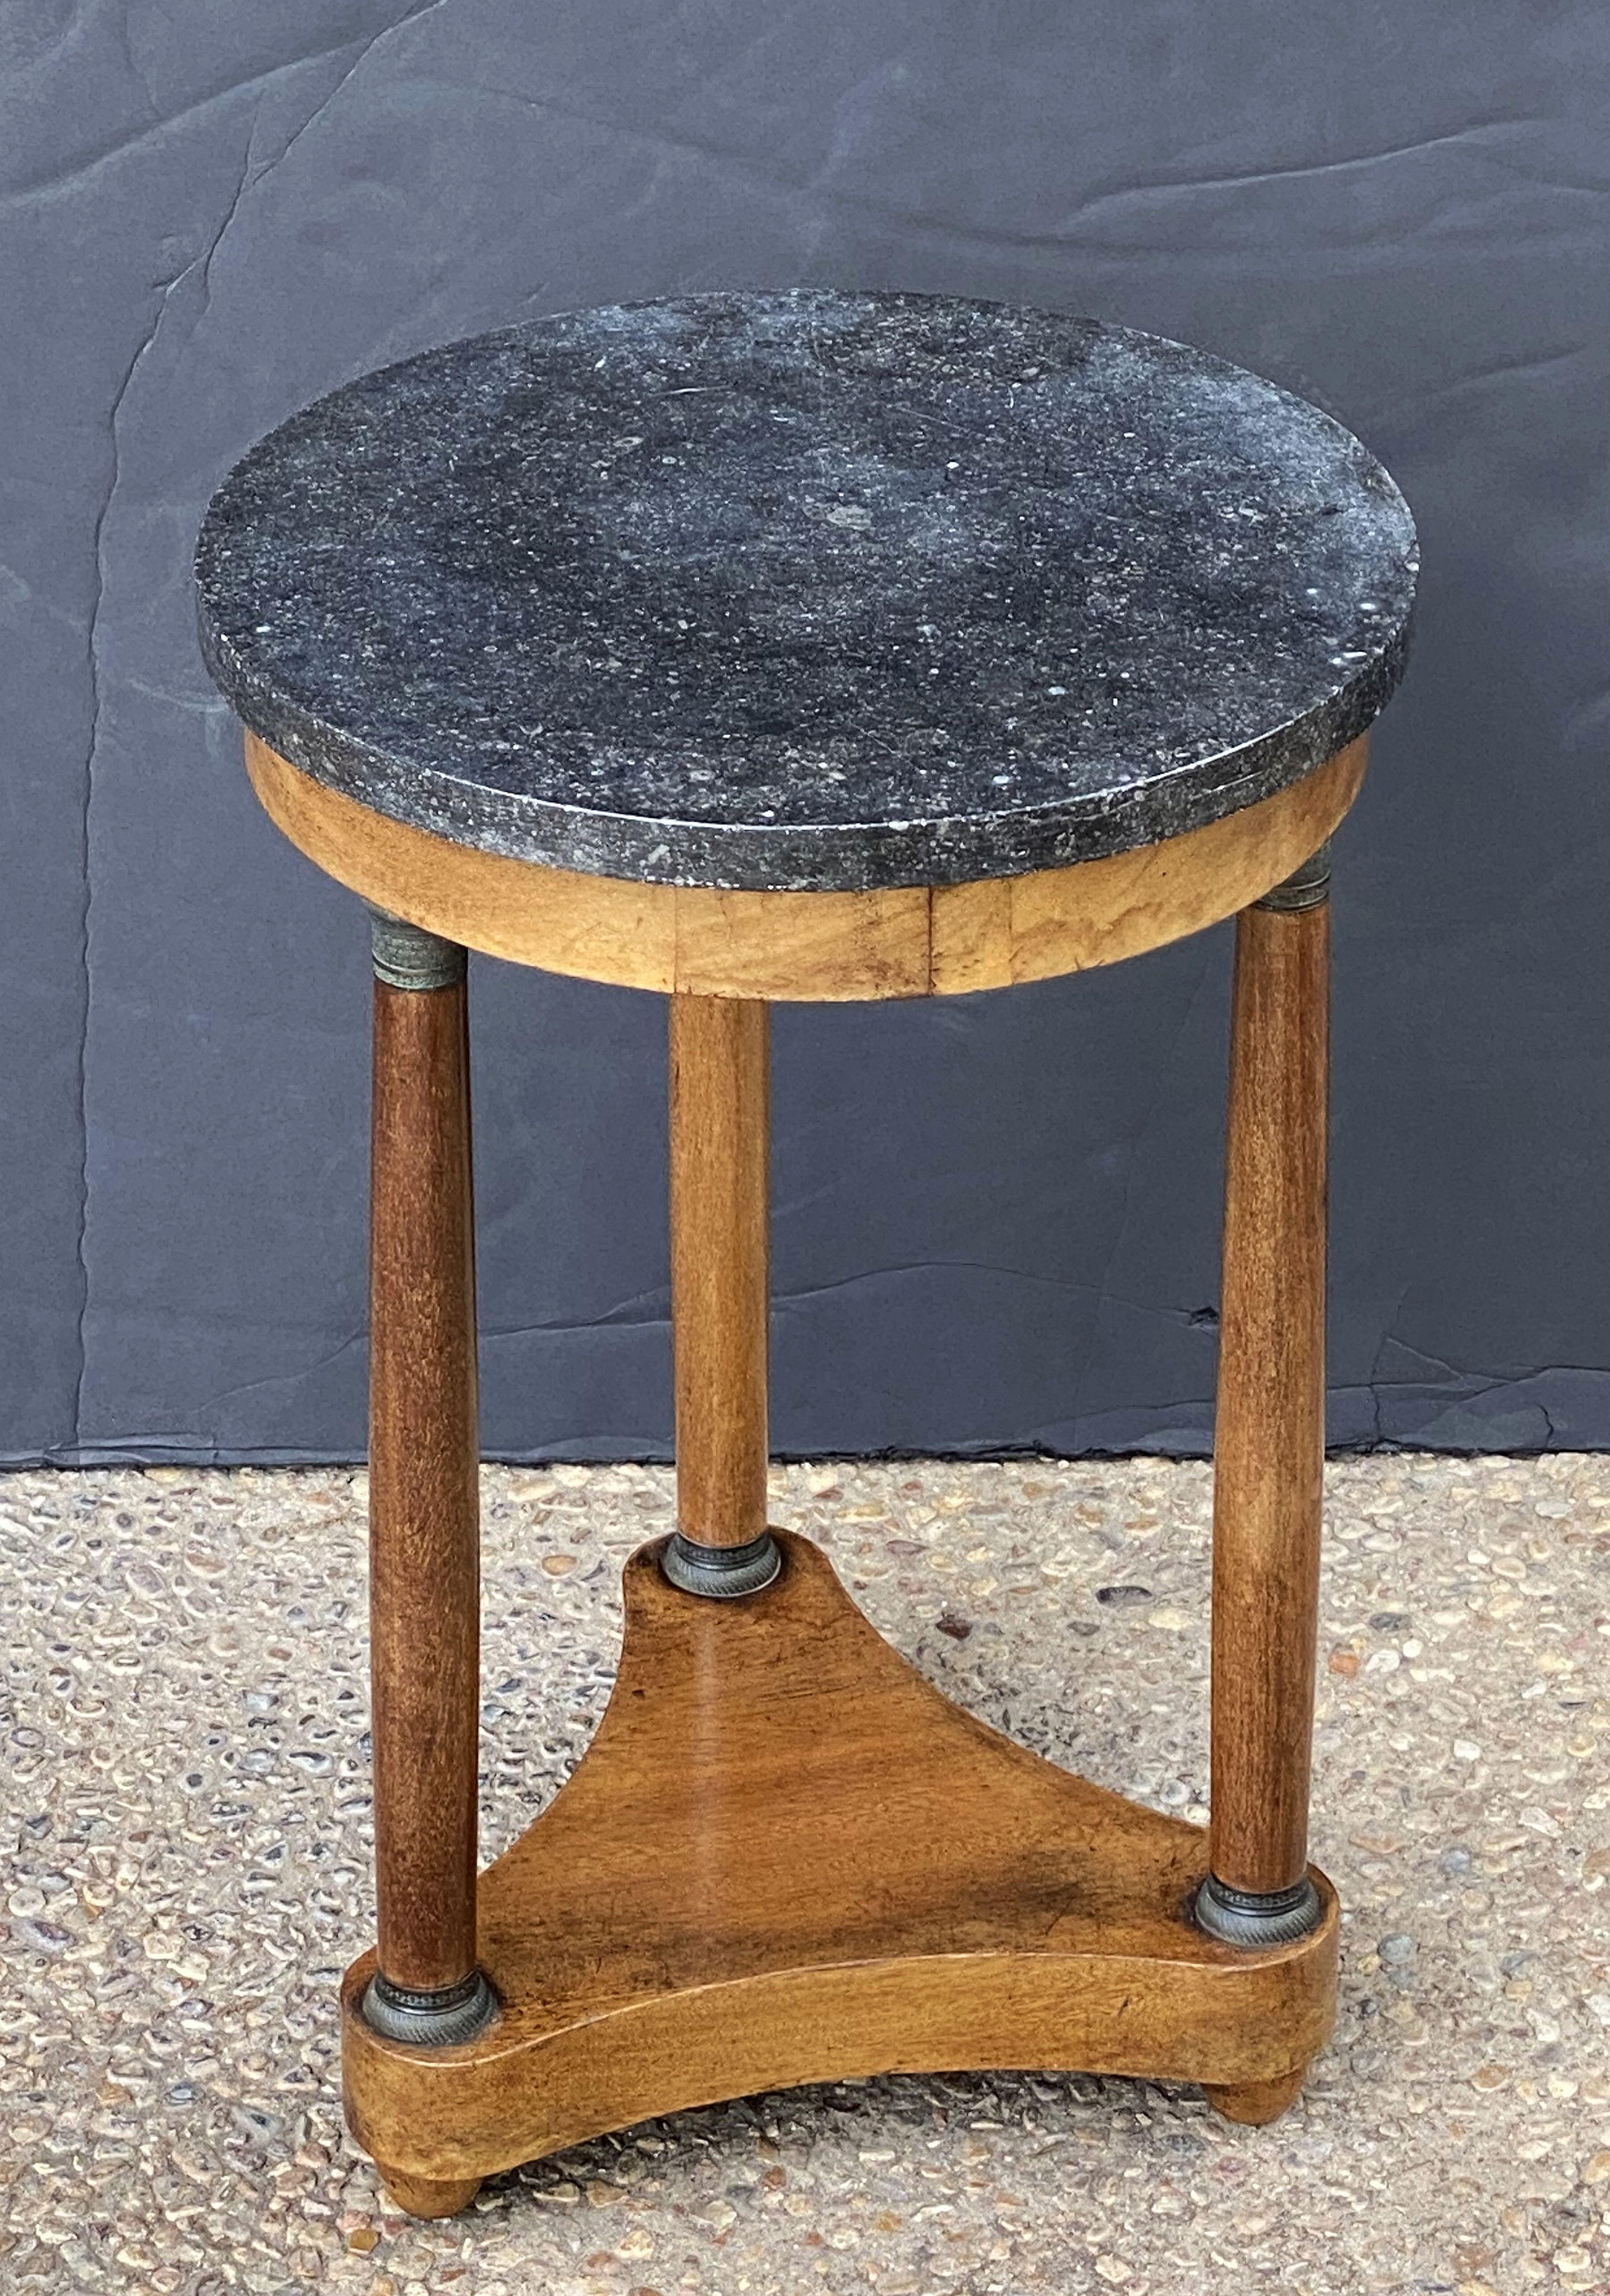 19th Century French Marble-Top Table or Guéridon in the Empire Style